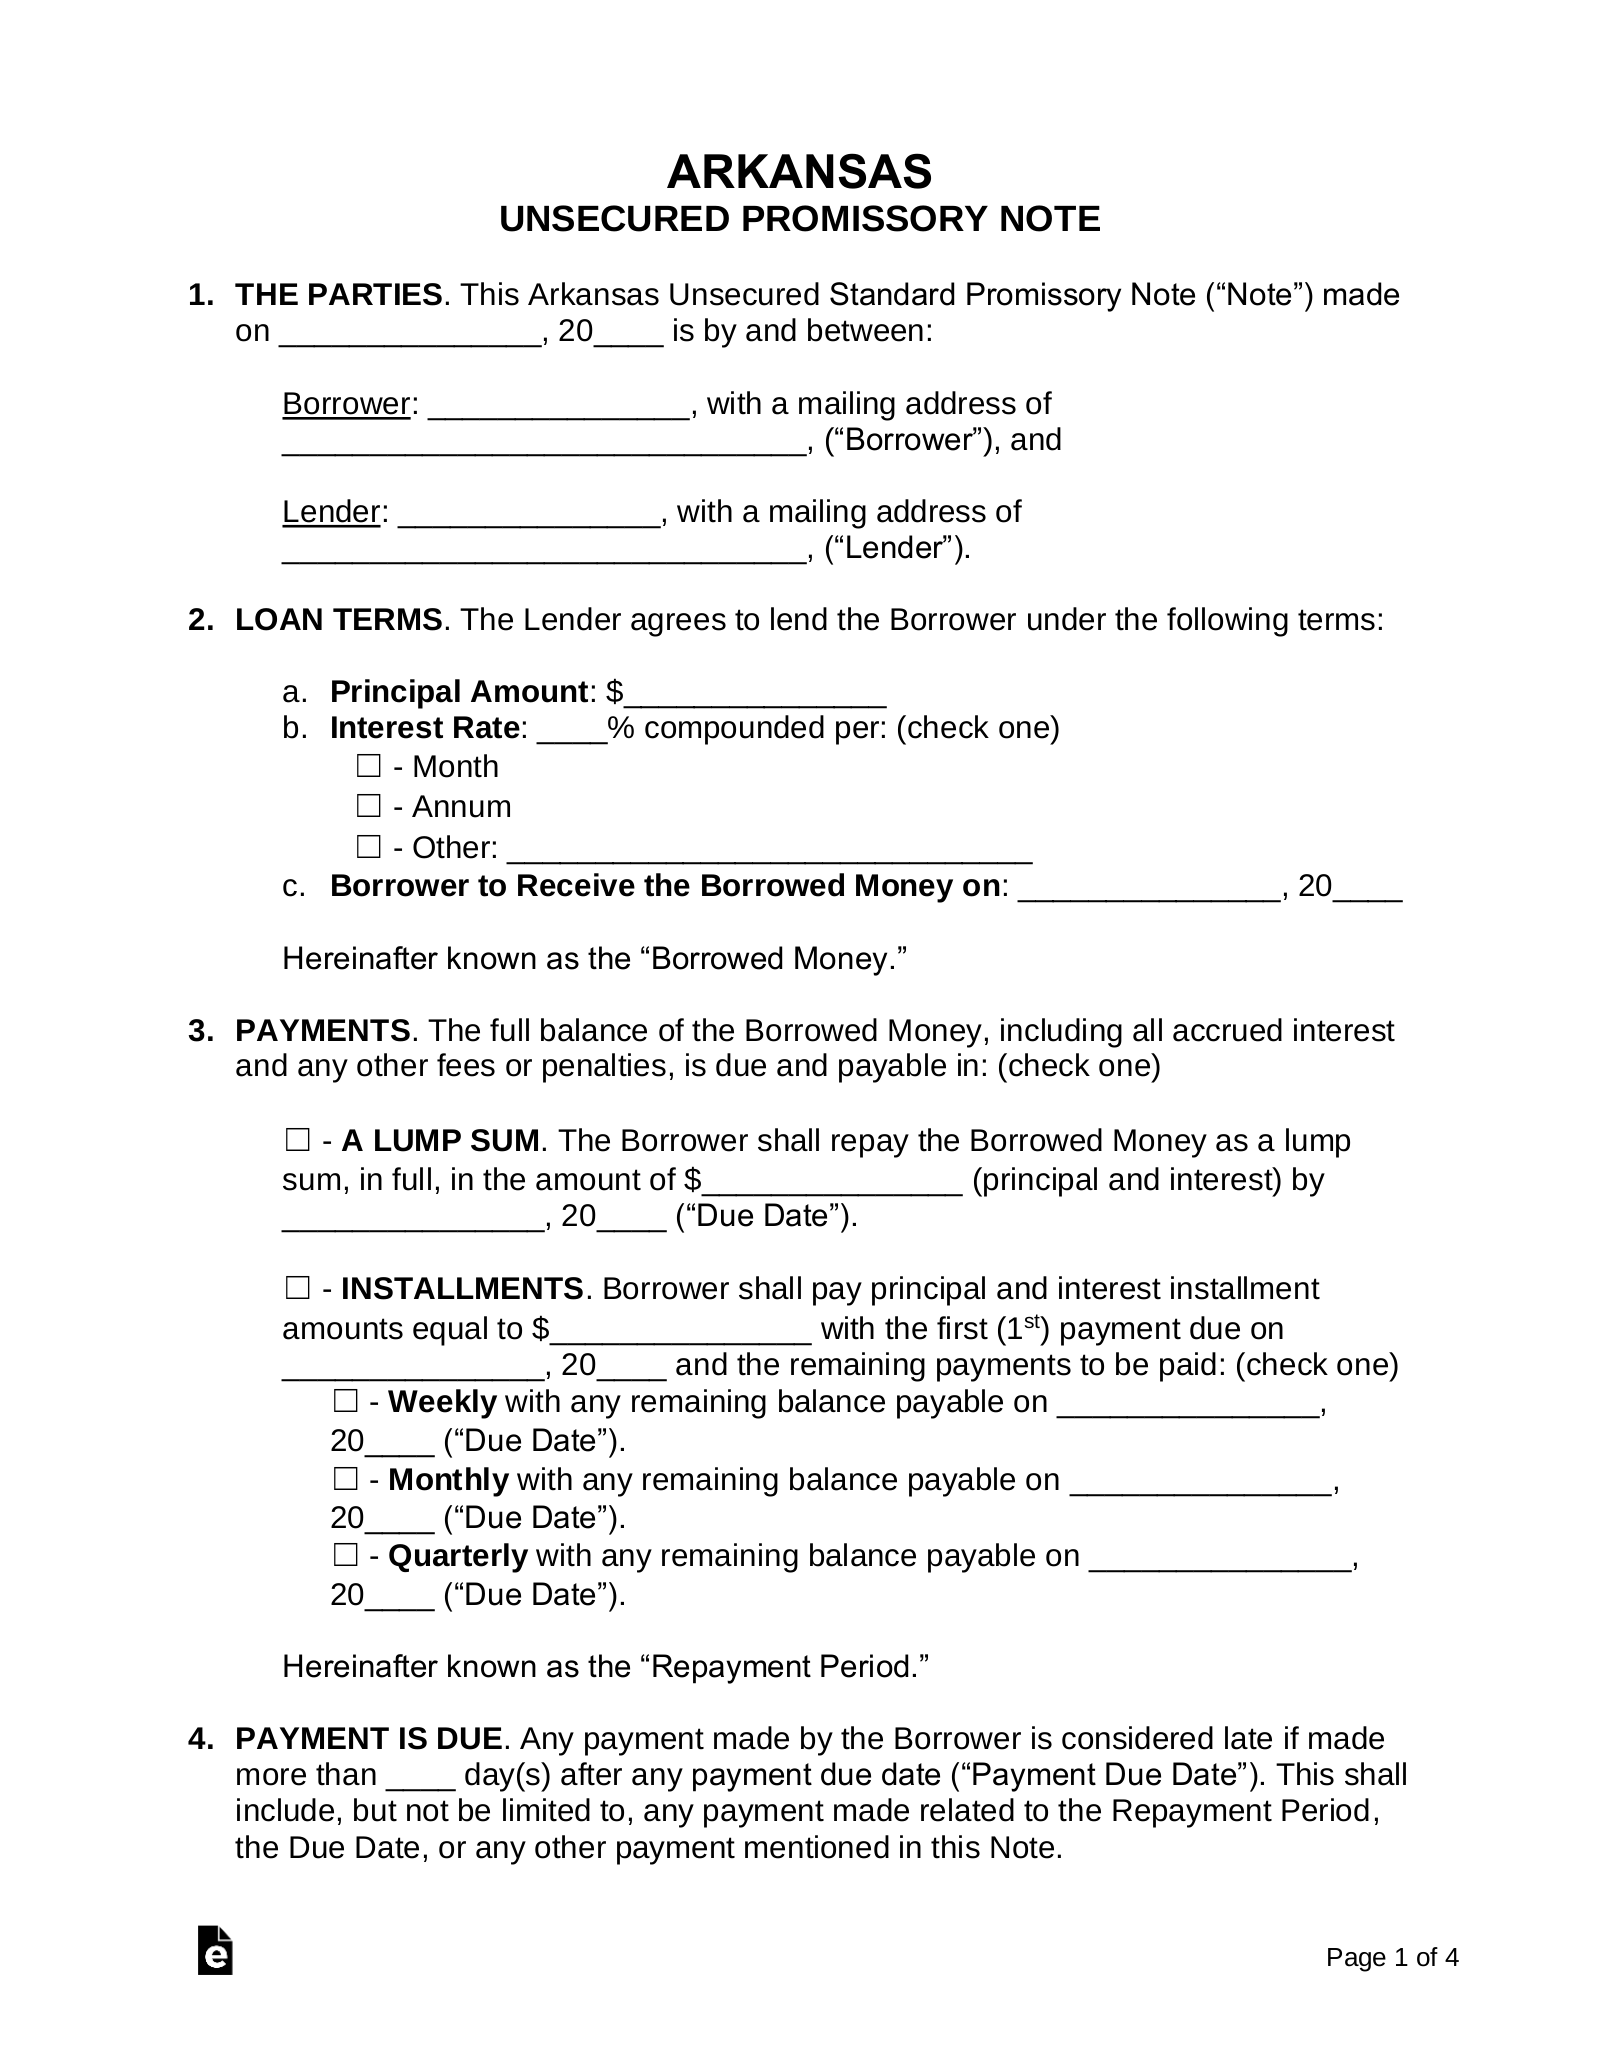 Arkansas Unsecured Promissory Note Template